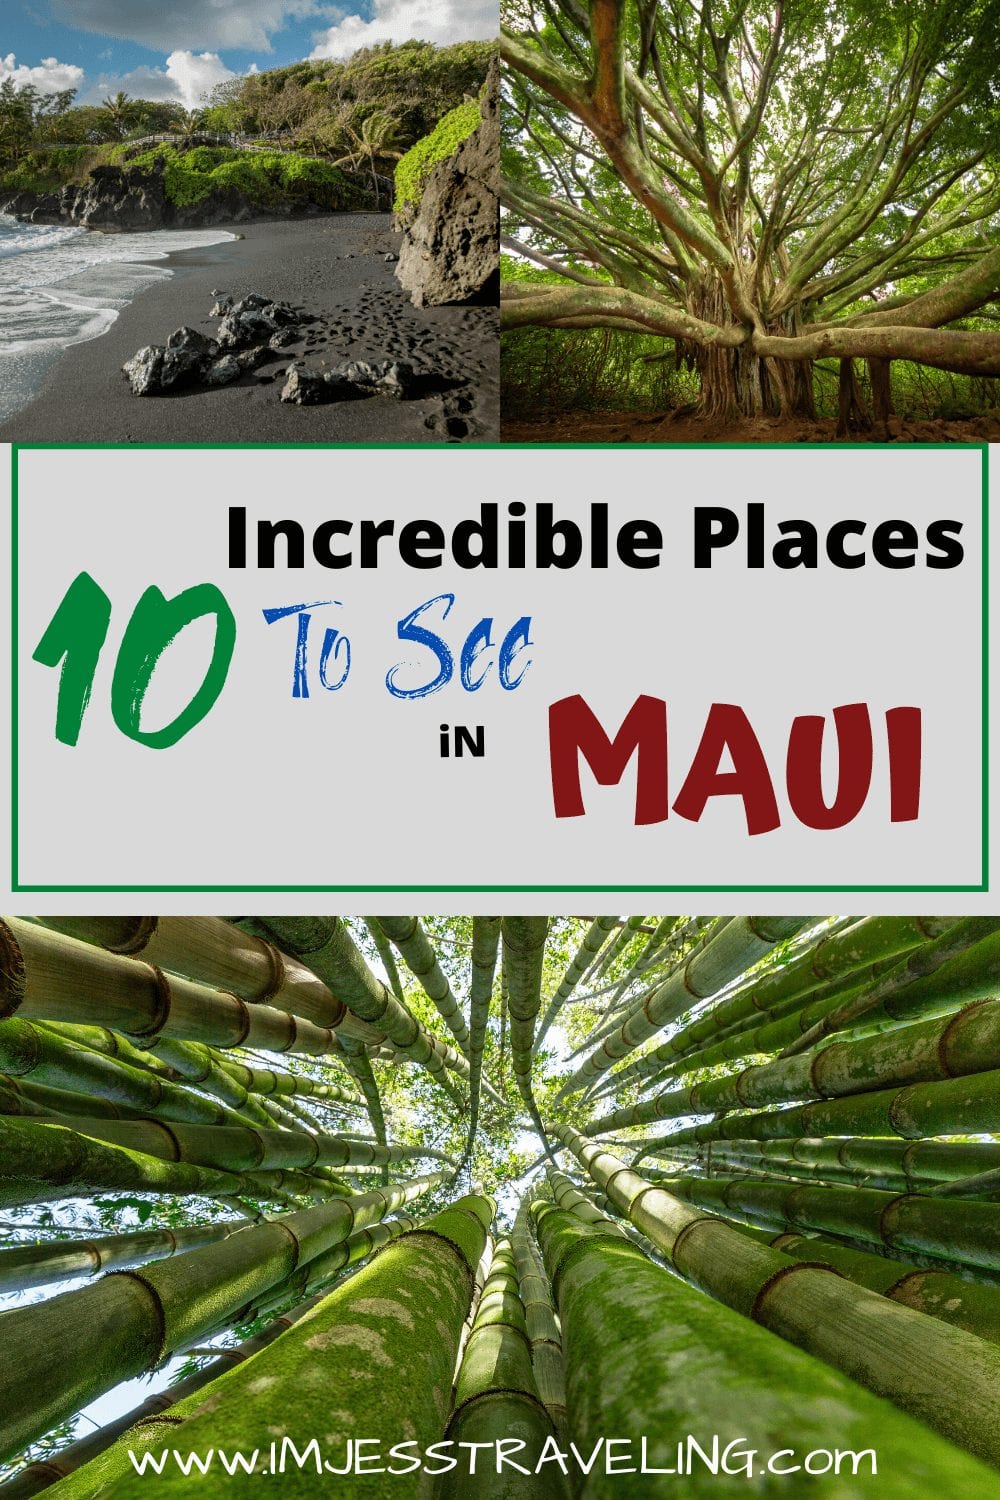 10 Incredible Places in Maui you Must See